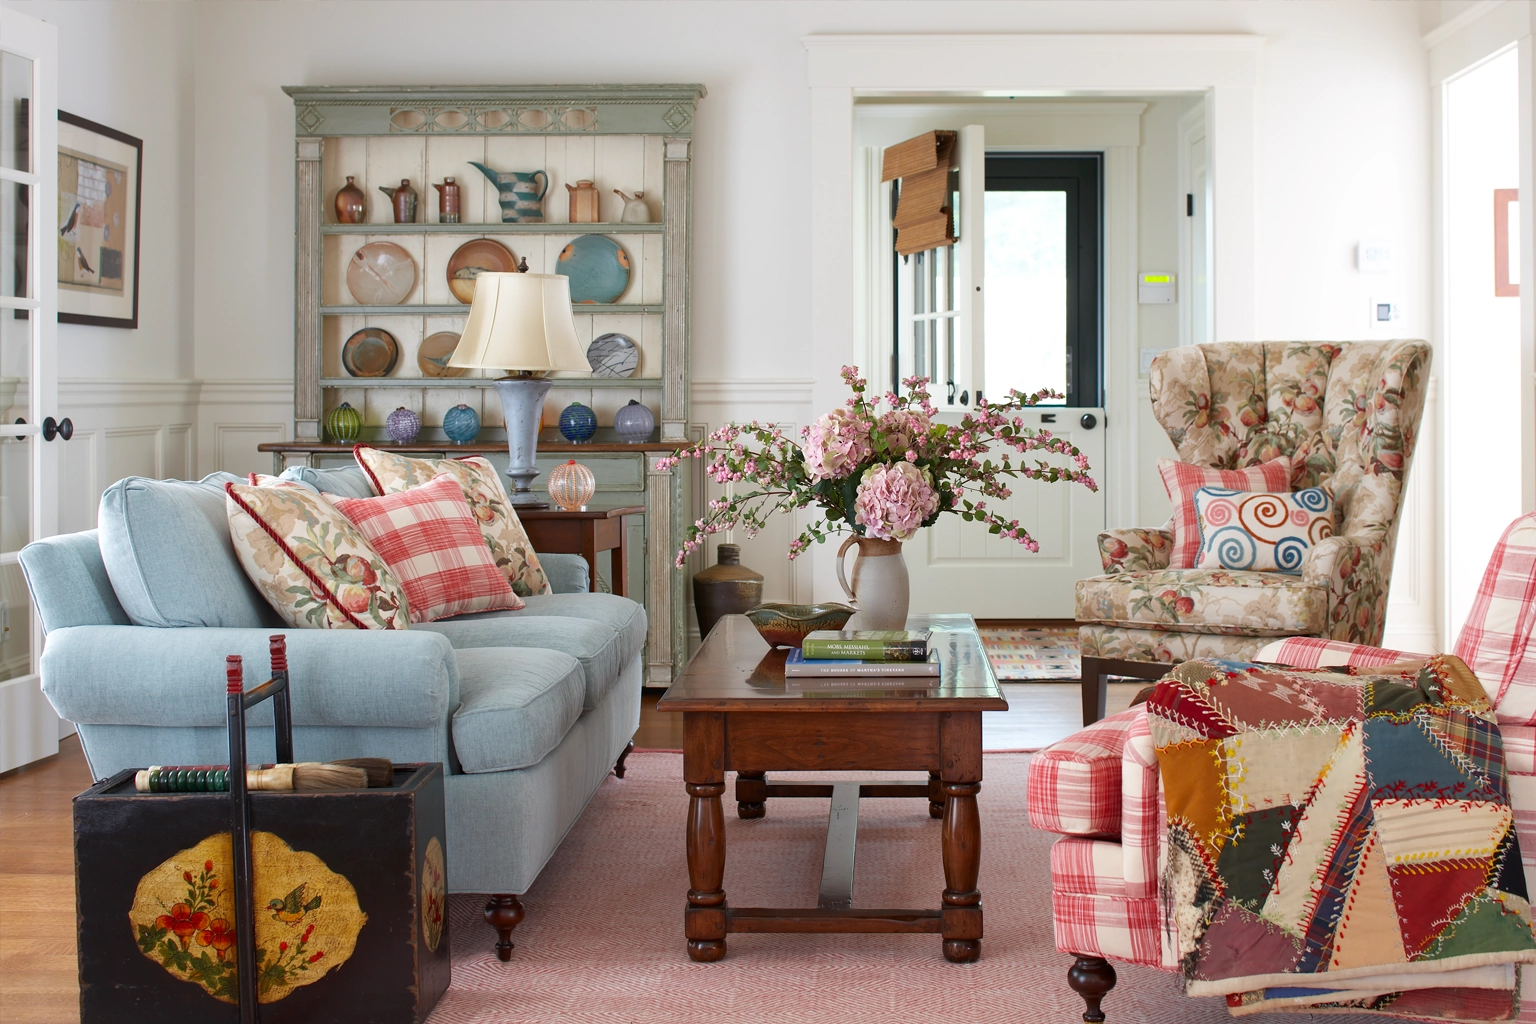 Eclectic living room with antiques, fall colors and patterns.